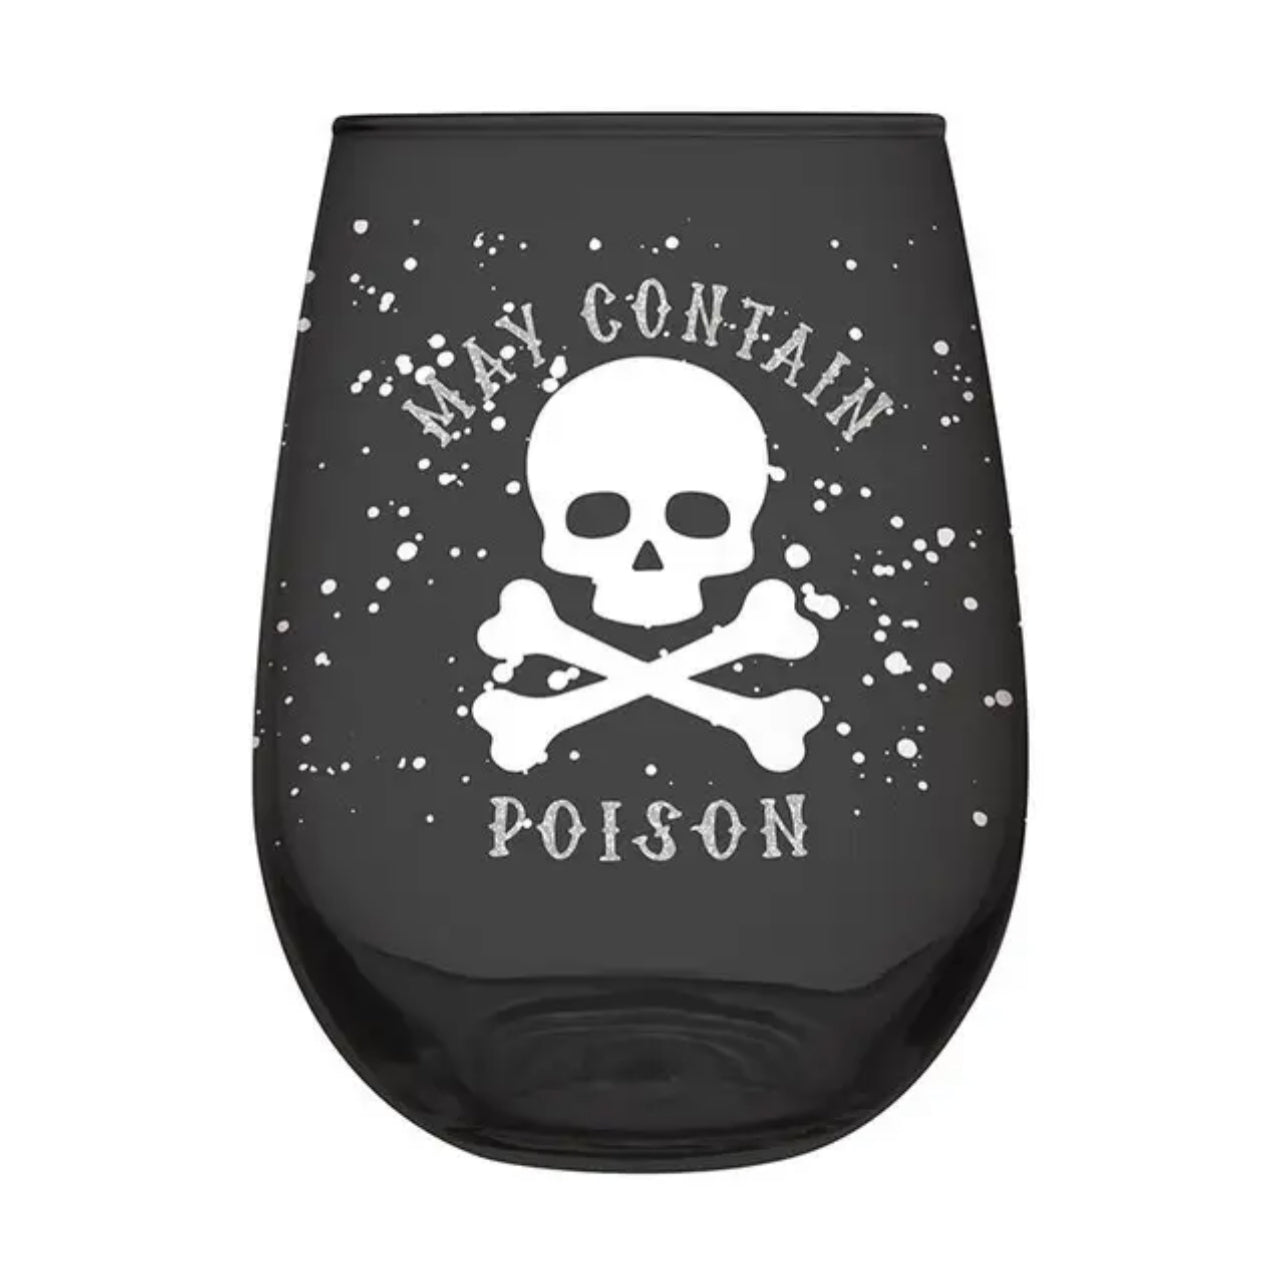 May Contain Poison 20 oz Stemless Wineglass